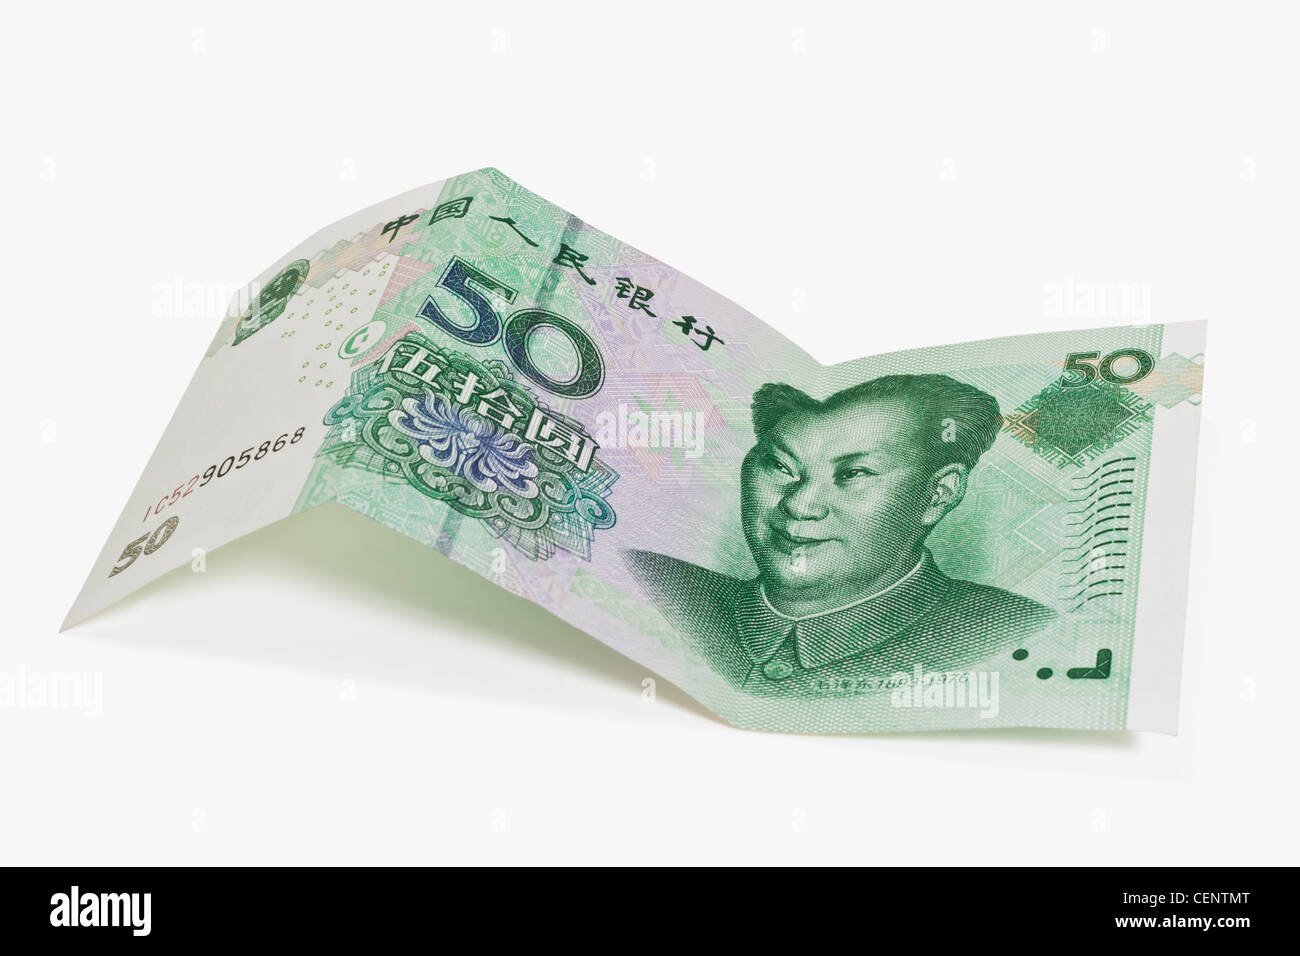 50 yuan bill with the portrait of Mao Zedong. The renminbi, the Chinese currency, was introduced in 1949. Stock Photo